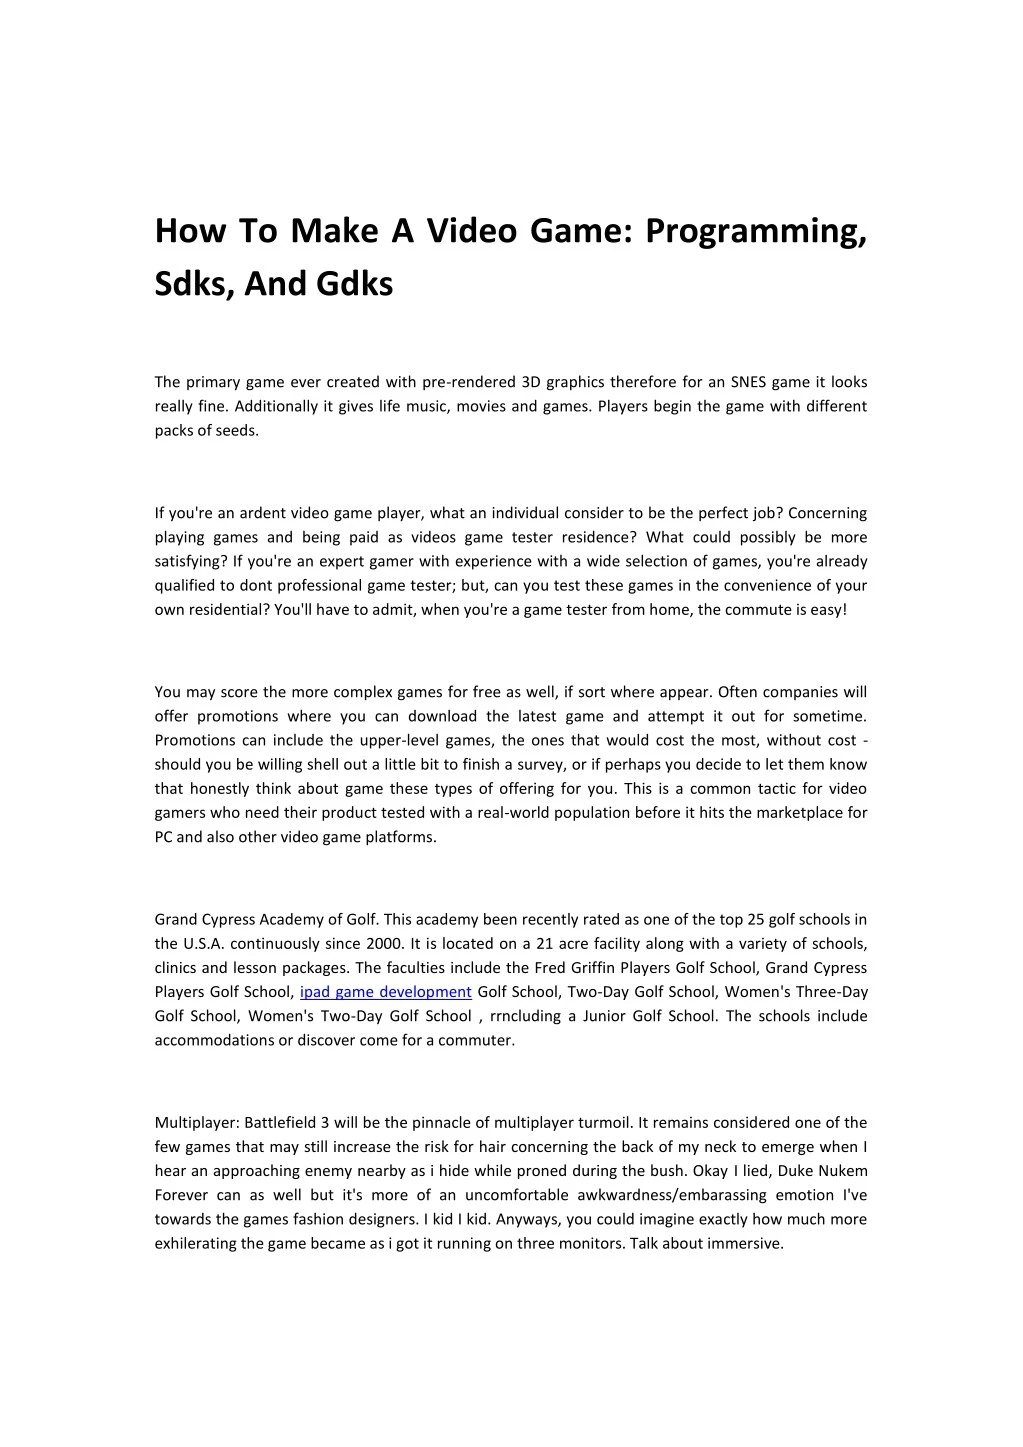 how to make a video game programming sdks and gdks